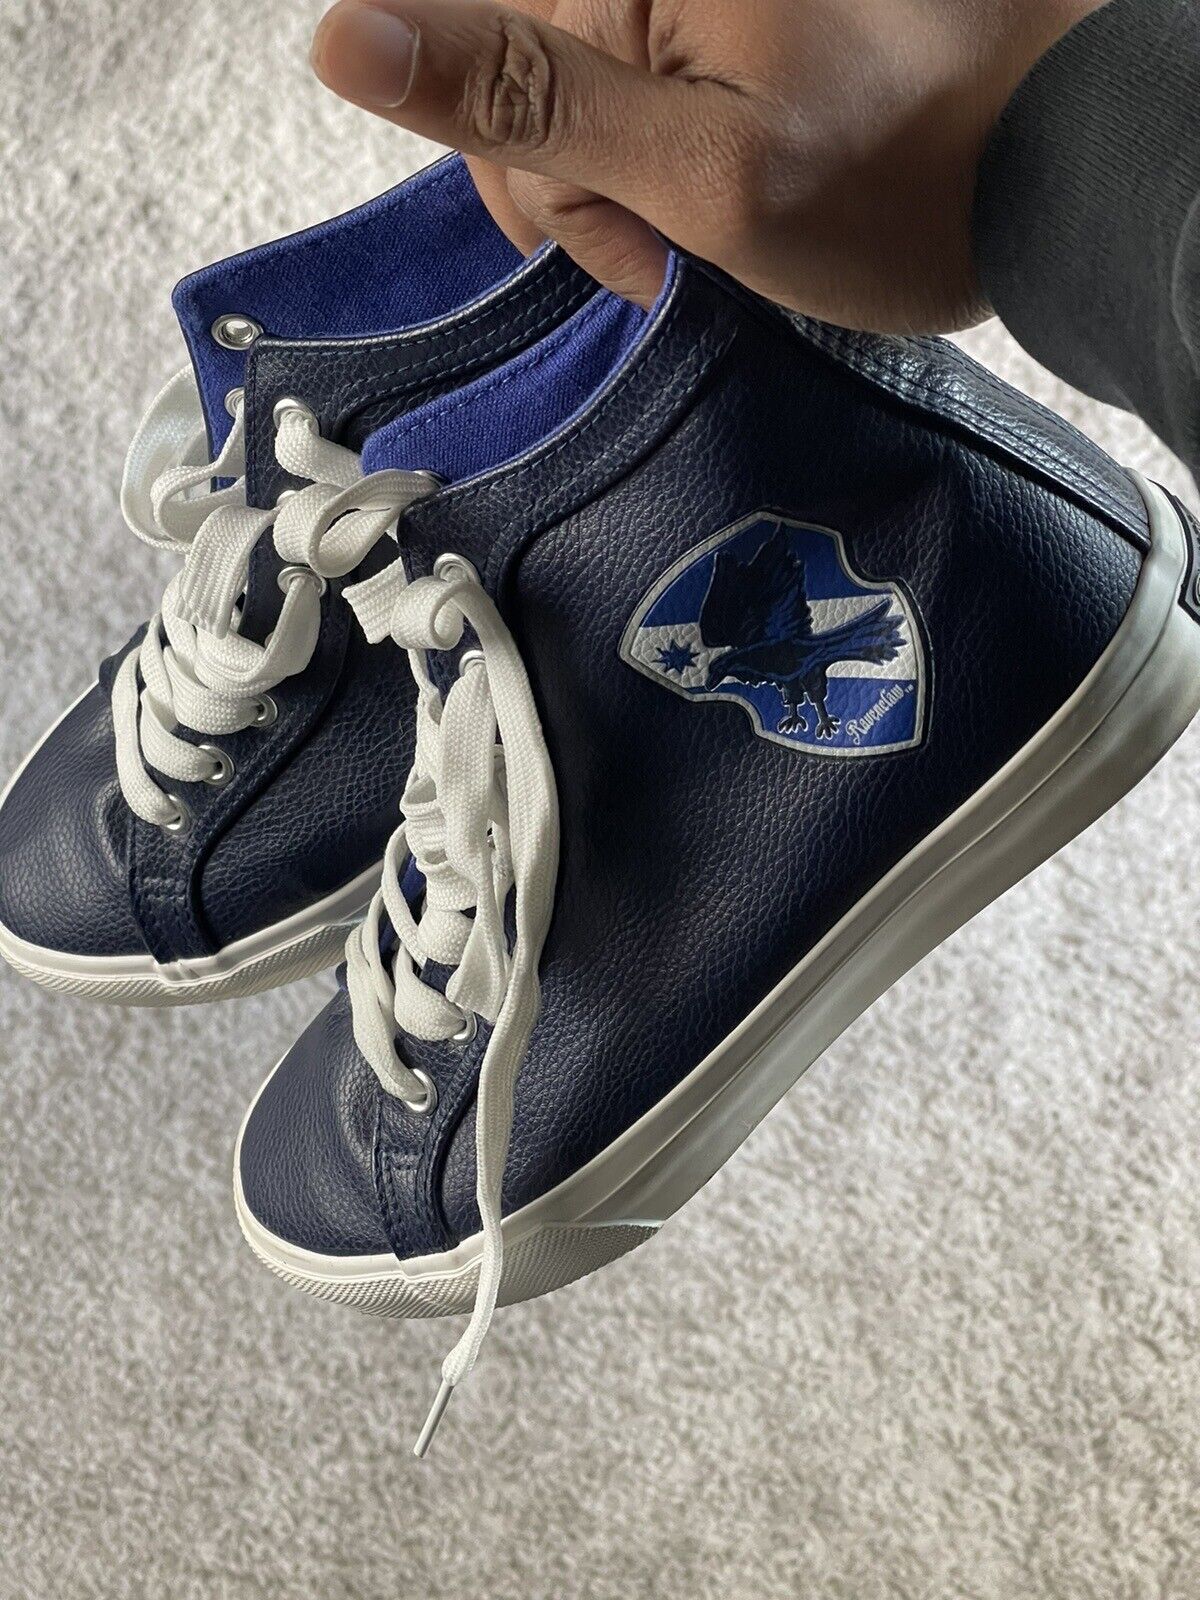 Harry Potter Ravenclaw Blue White High Top Casual Sneaker Shoes Mens Womens Sz 9